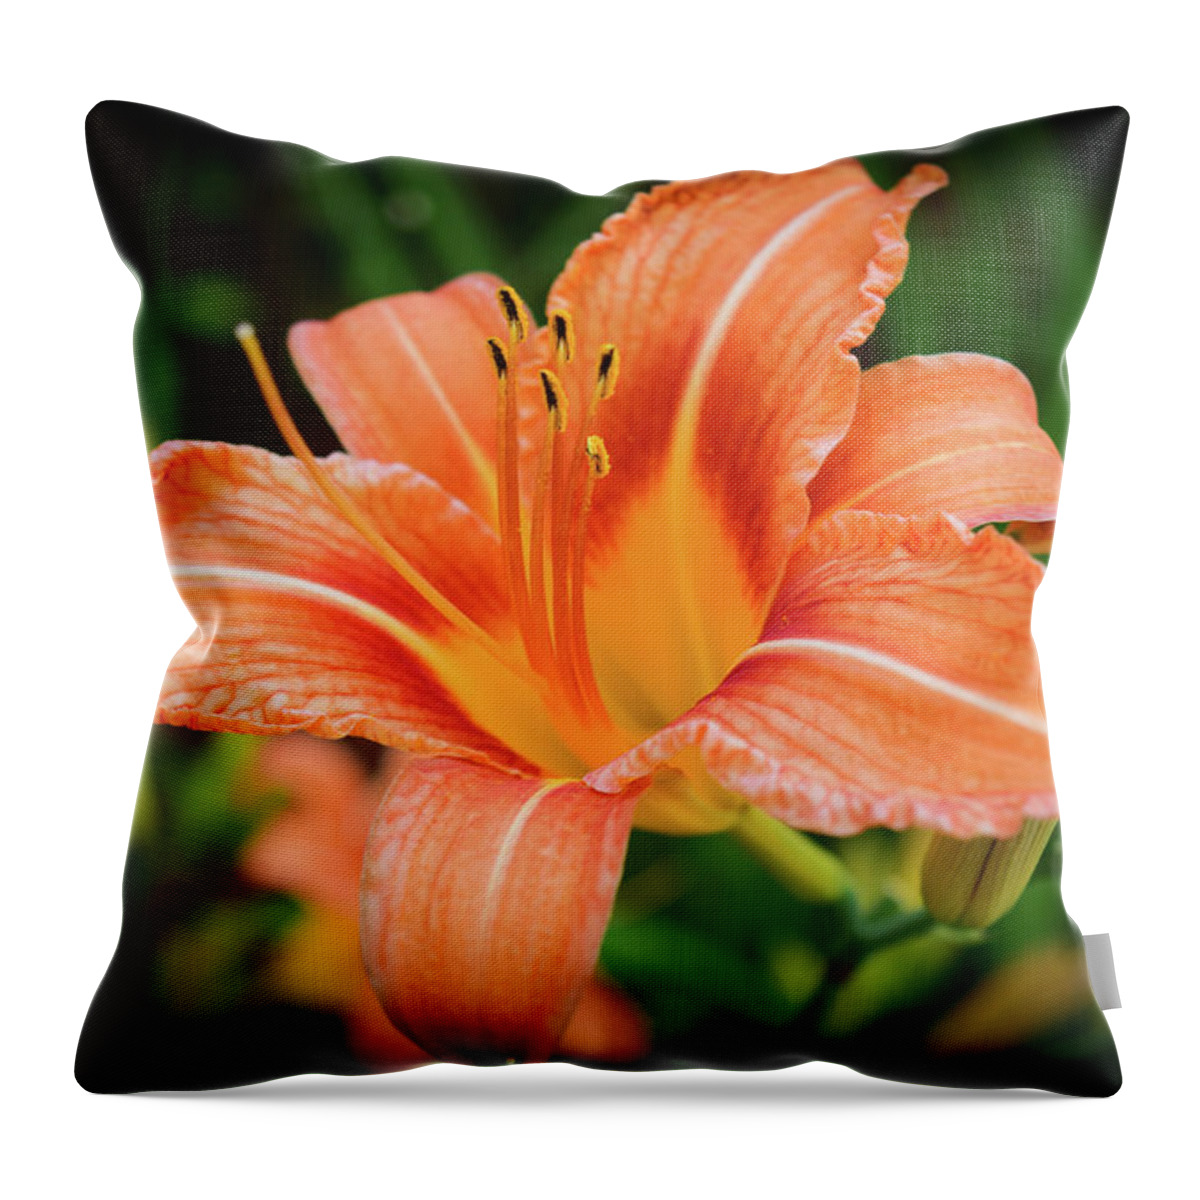 Flower Throw Pillow featuring the photograph Lily by Nicole Lloyd